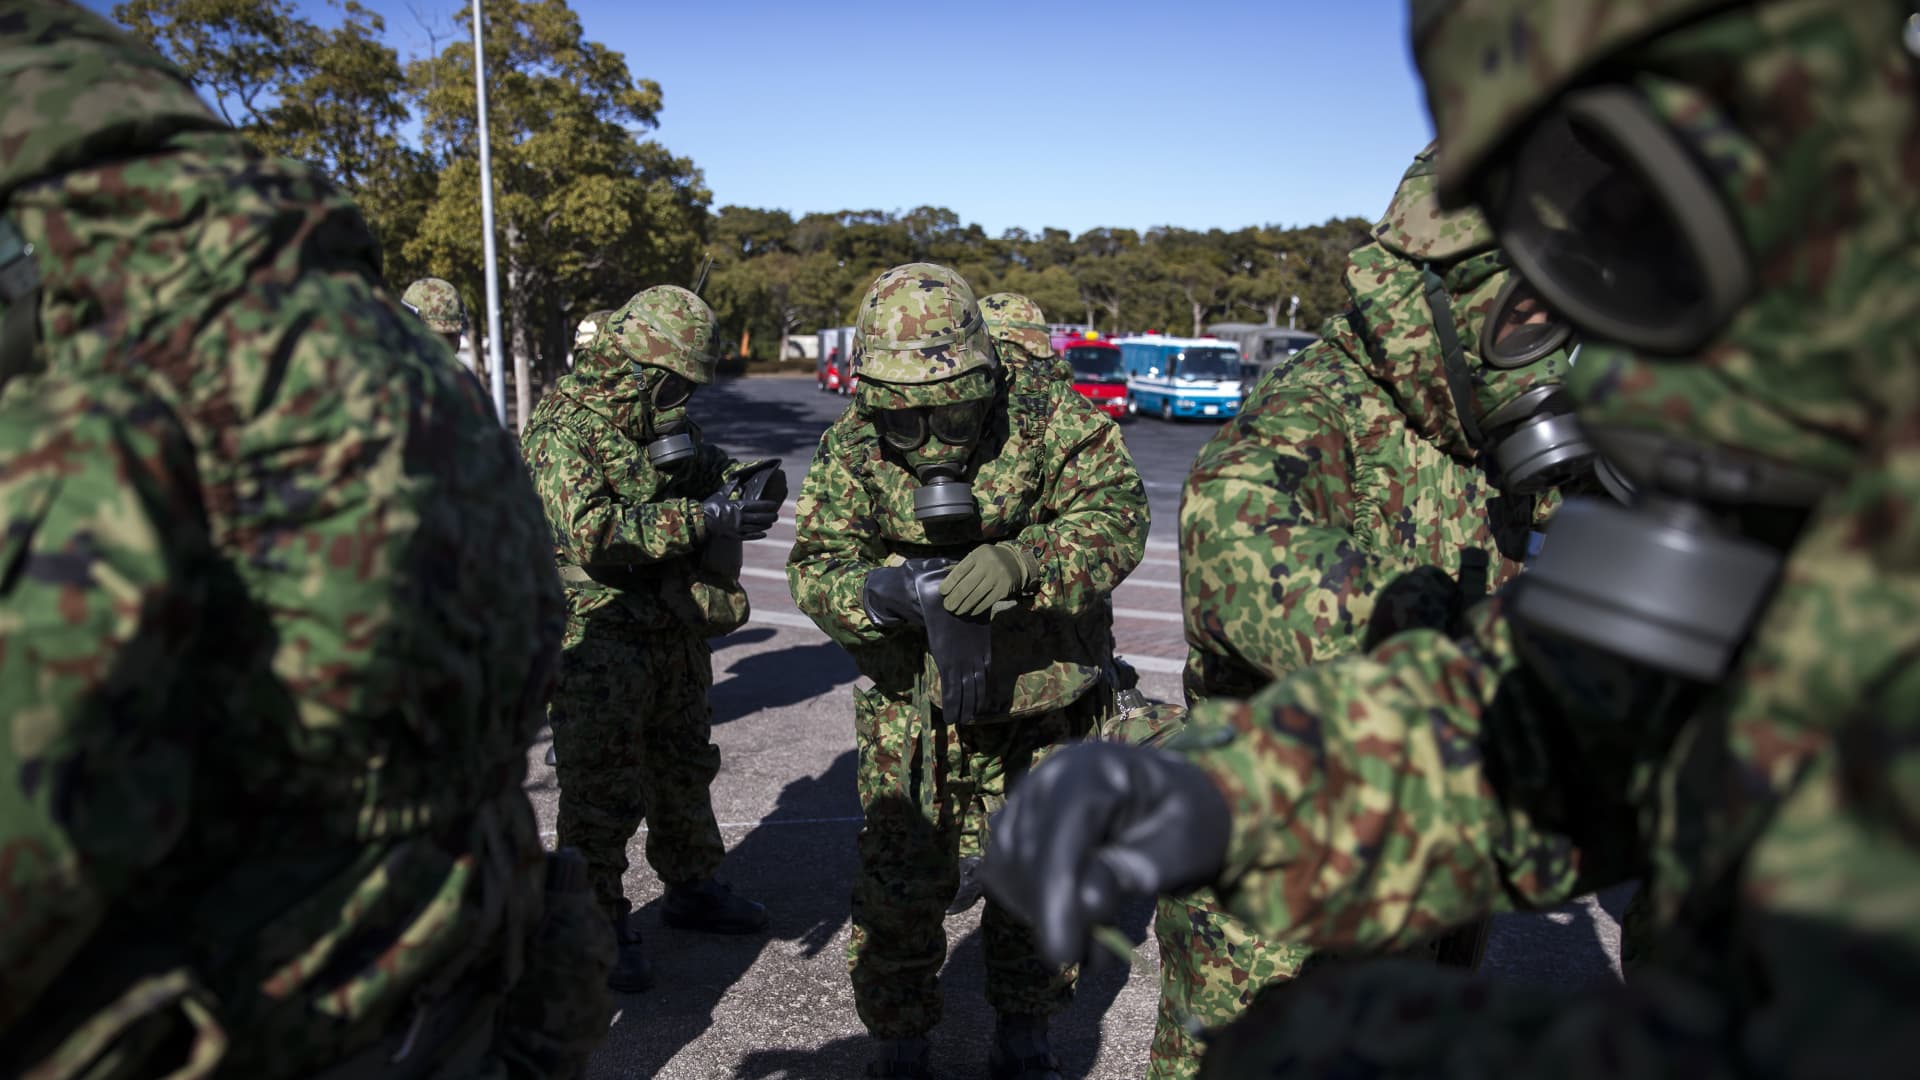 Members of the Japan Ground Self-Defense Force wearing masks prepare for a sarin attack drill on Wednesday, Jan. 24, 2018. Japan announced on Tuesday it is sending Ukraine masks and clothing designed to protect against chemical weapons, as well as drones.